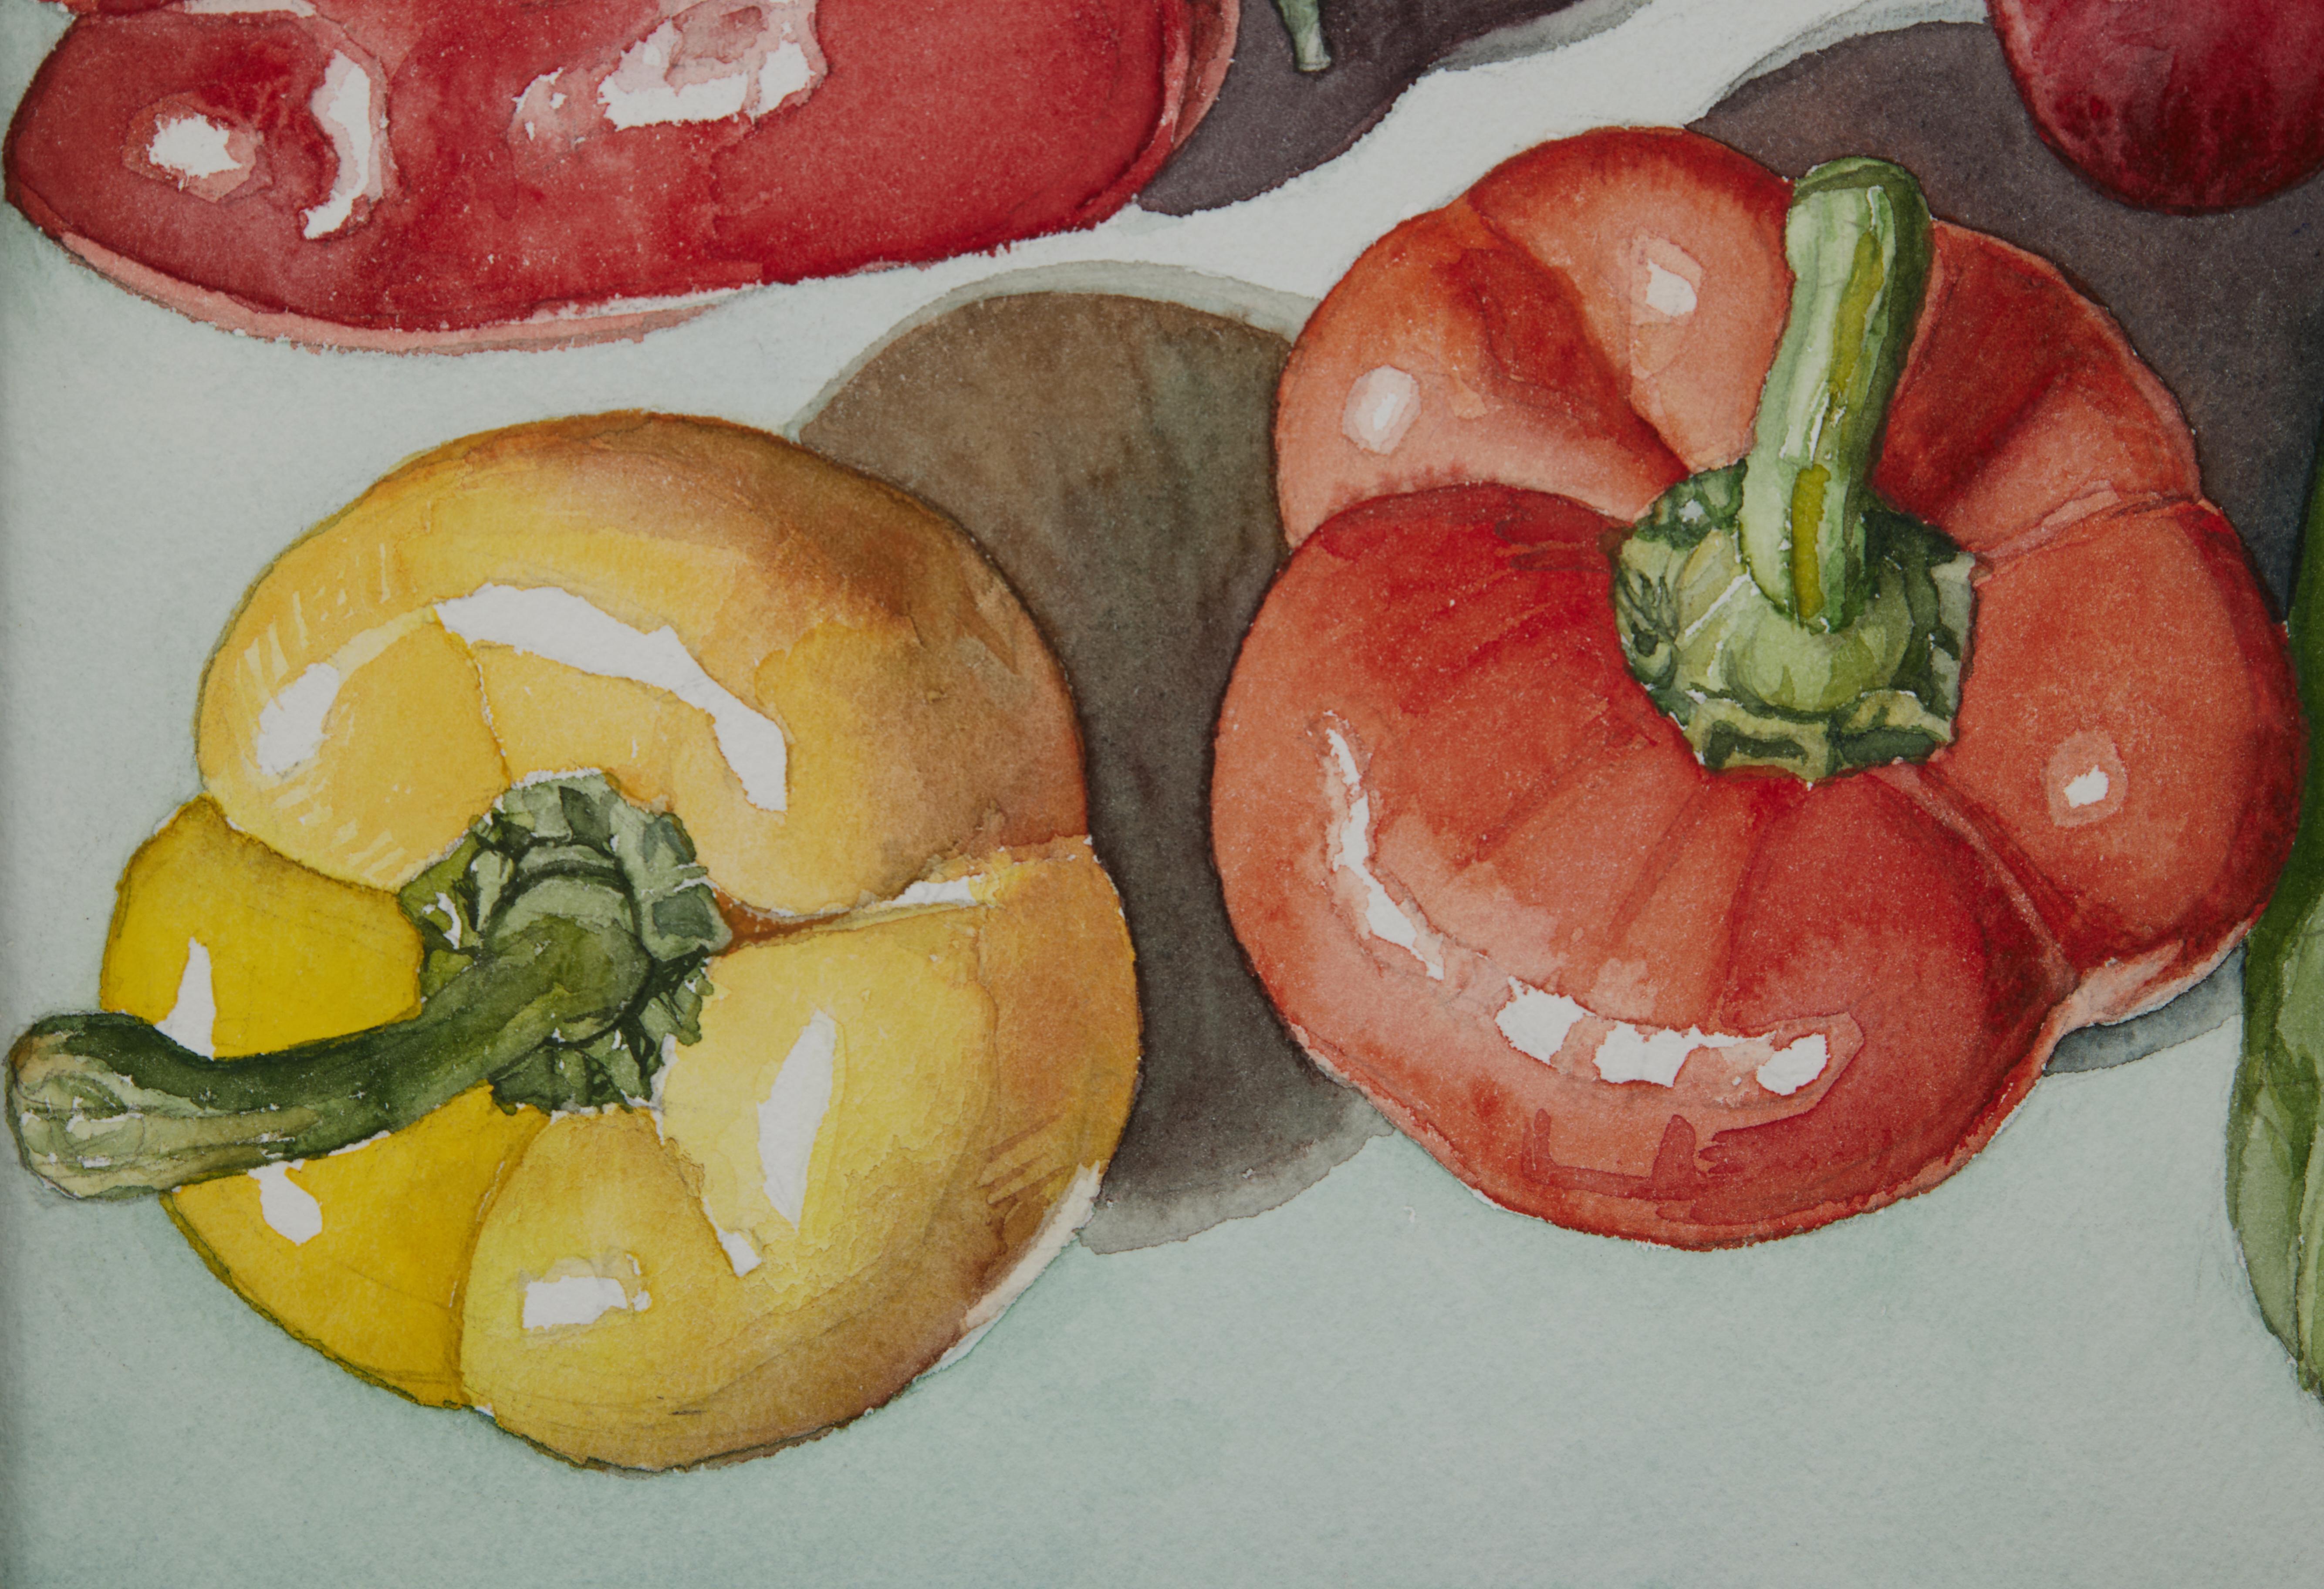 George Mauersberger (American, 20th Century)
Veg 7, 2004
Watercolor on paper
9 x 12 inches
13 x 16 inches, framed

George Mauersberger completed the foundations program at Pratt Institute in Brooklyn, NY in 1974. He received a Bachelor of Fine Arts